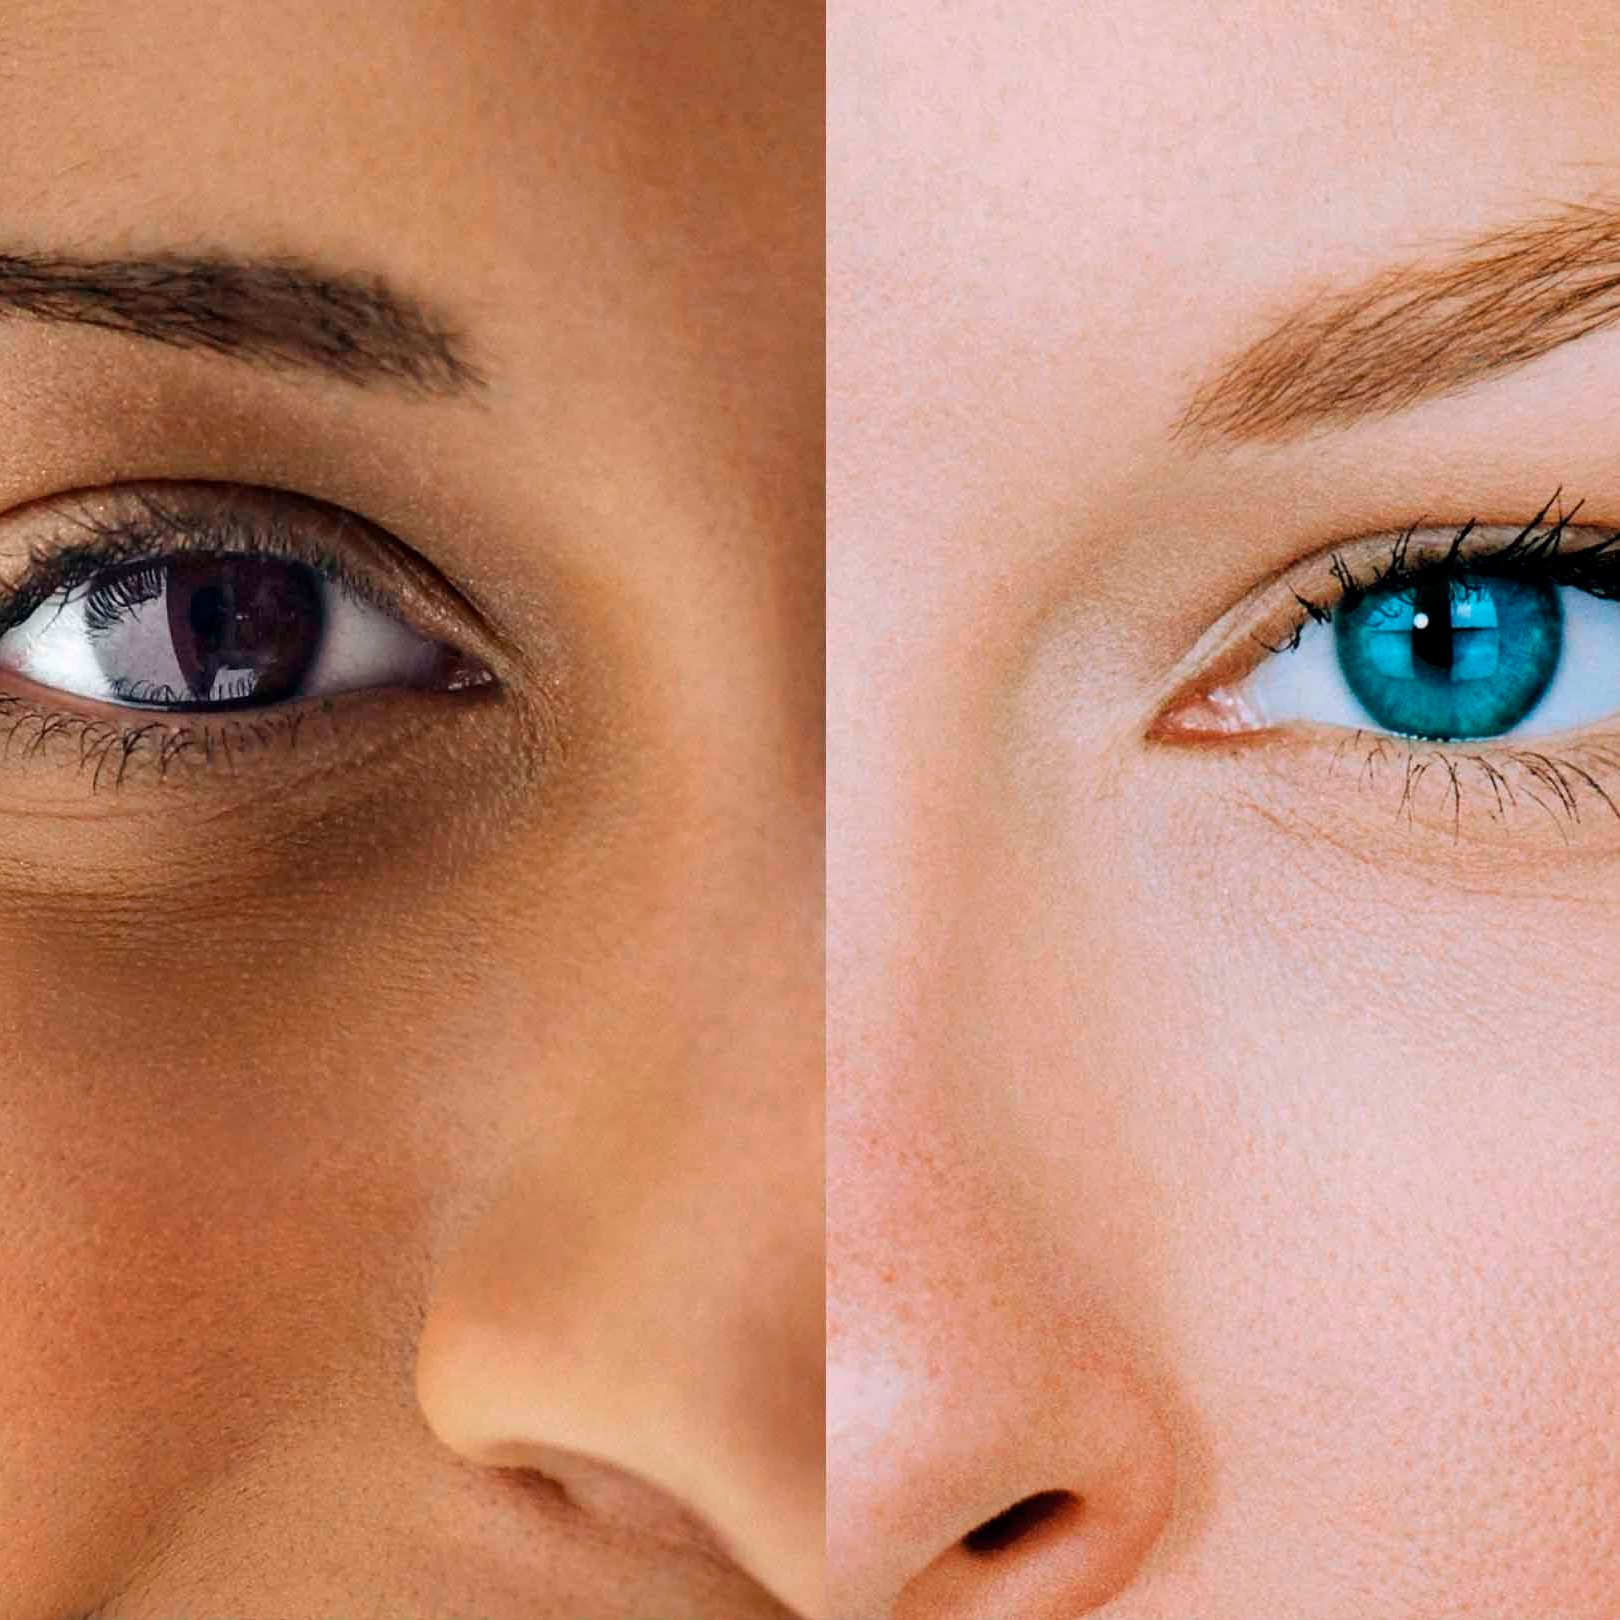 Combined photos of half of two individuals' faces, making a complete face. The individual on the left has brown eyes and brown skin, the individual on the right has blue eyes and white skin.